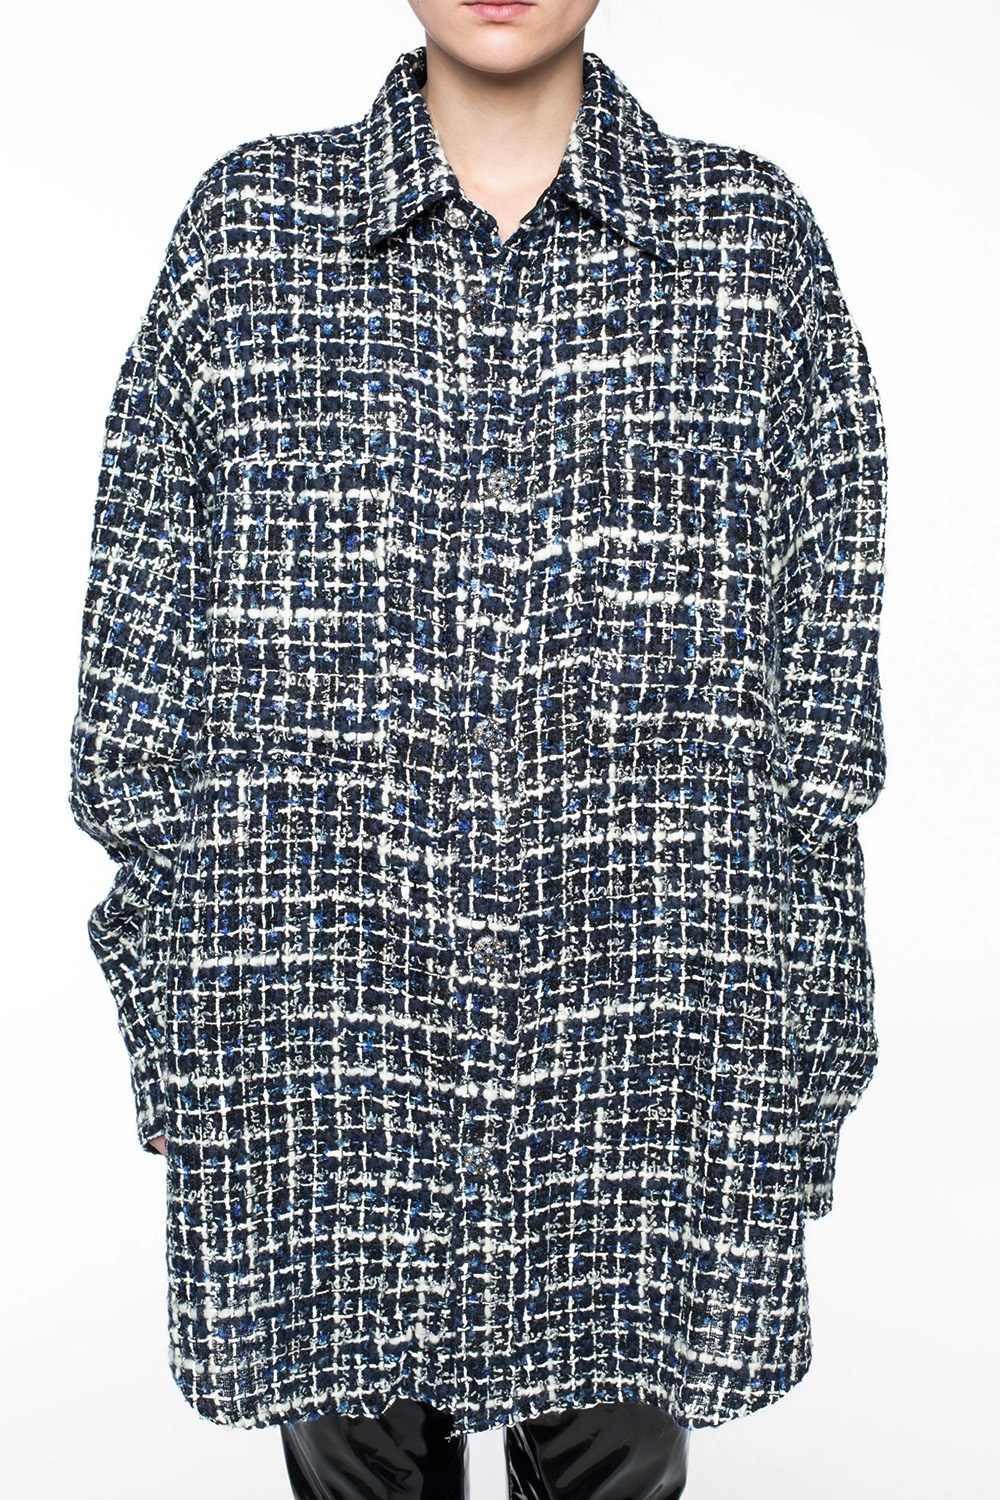 Faith Connexion Light blue Over sized tweed shirt - Luxed